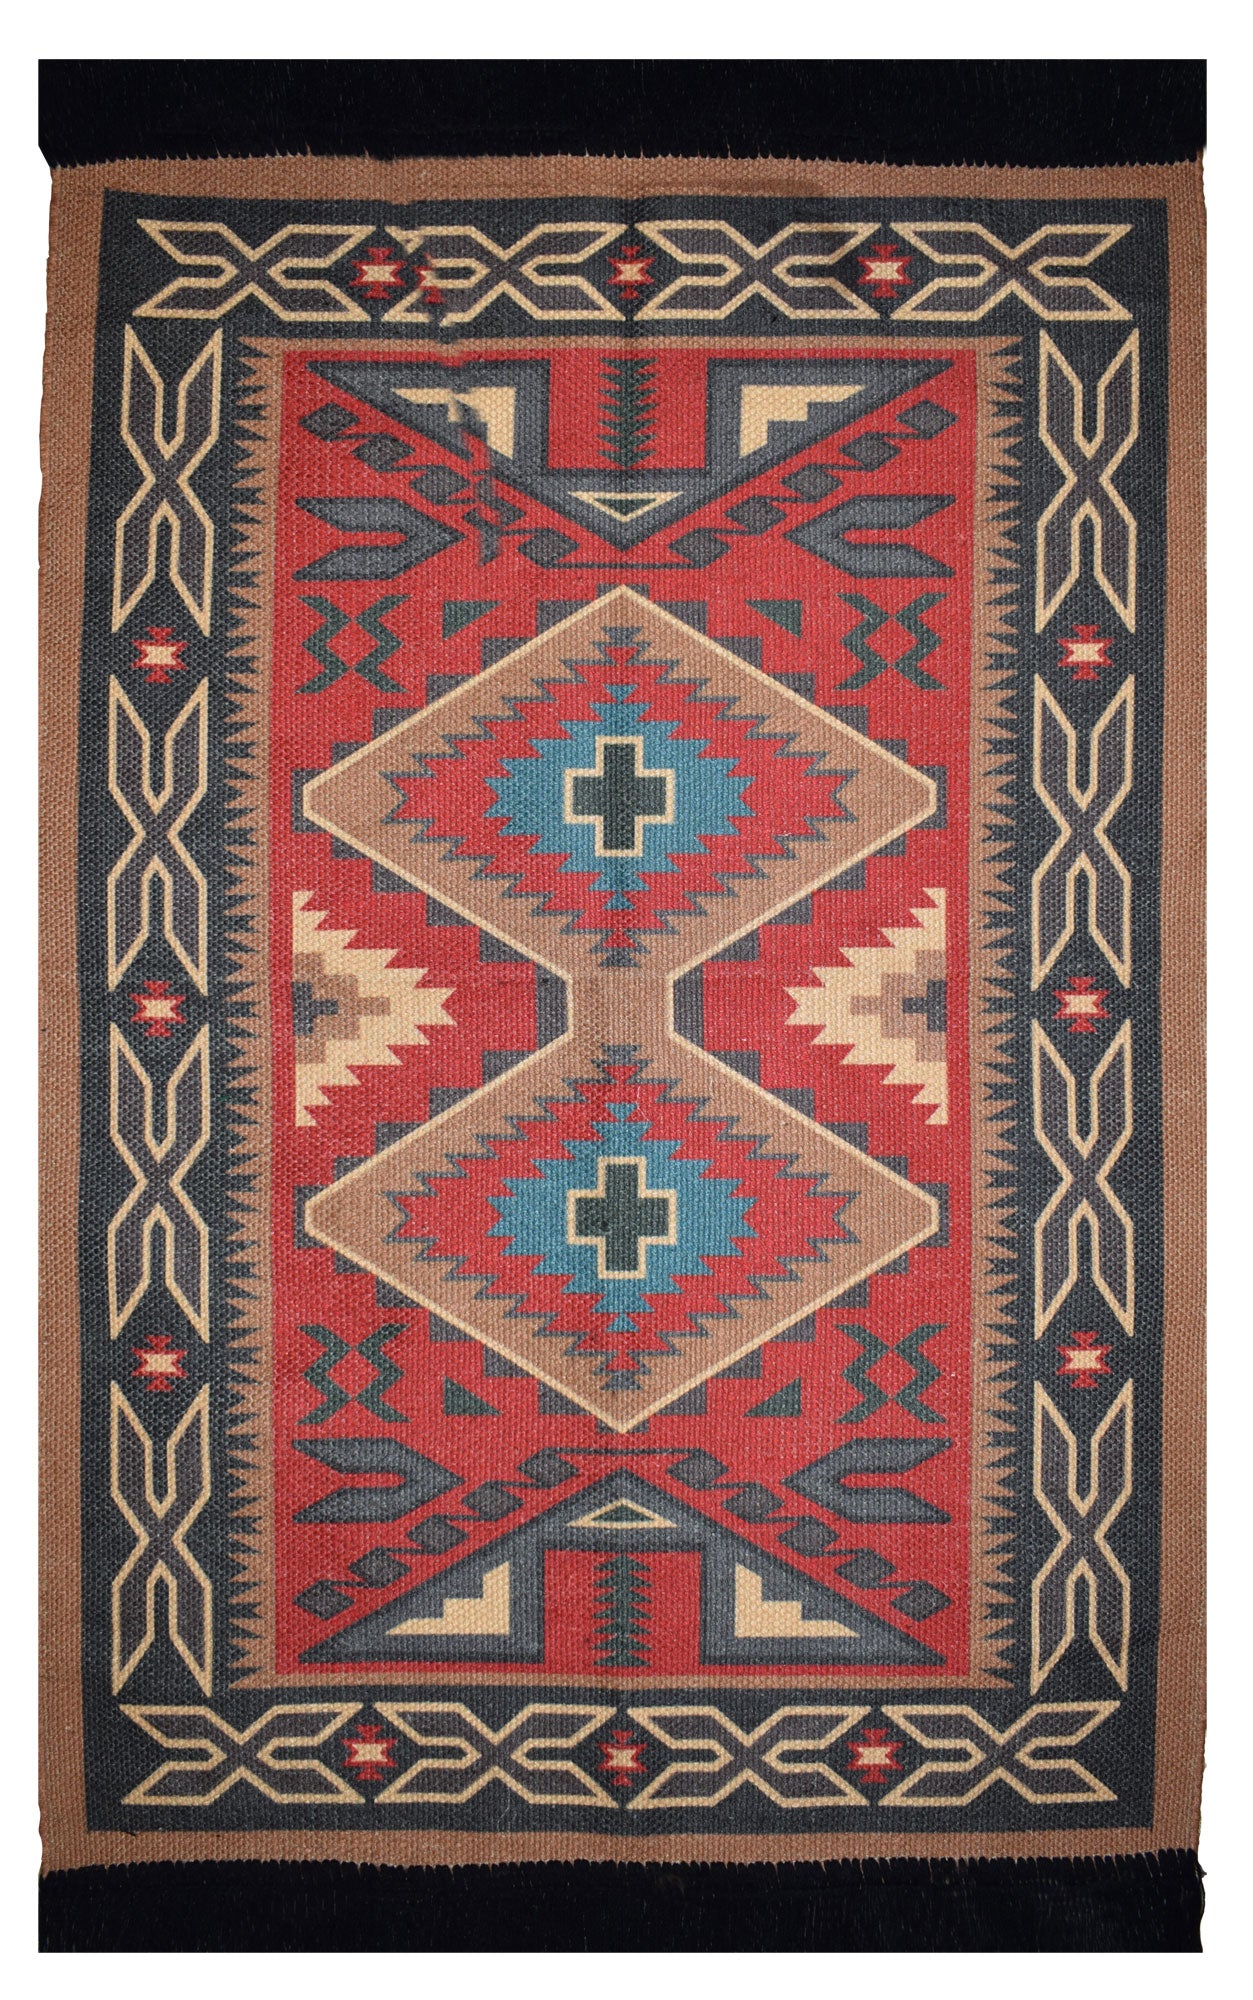 ''Distressed TAPESTRY Rugs, Design #4''